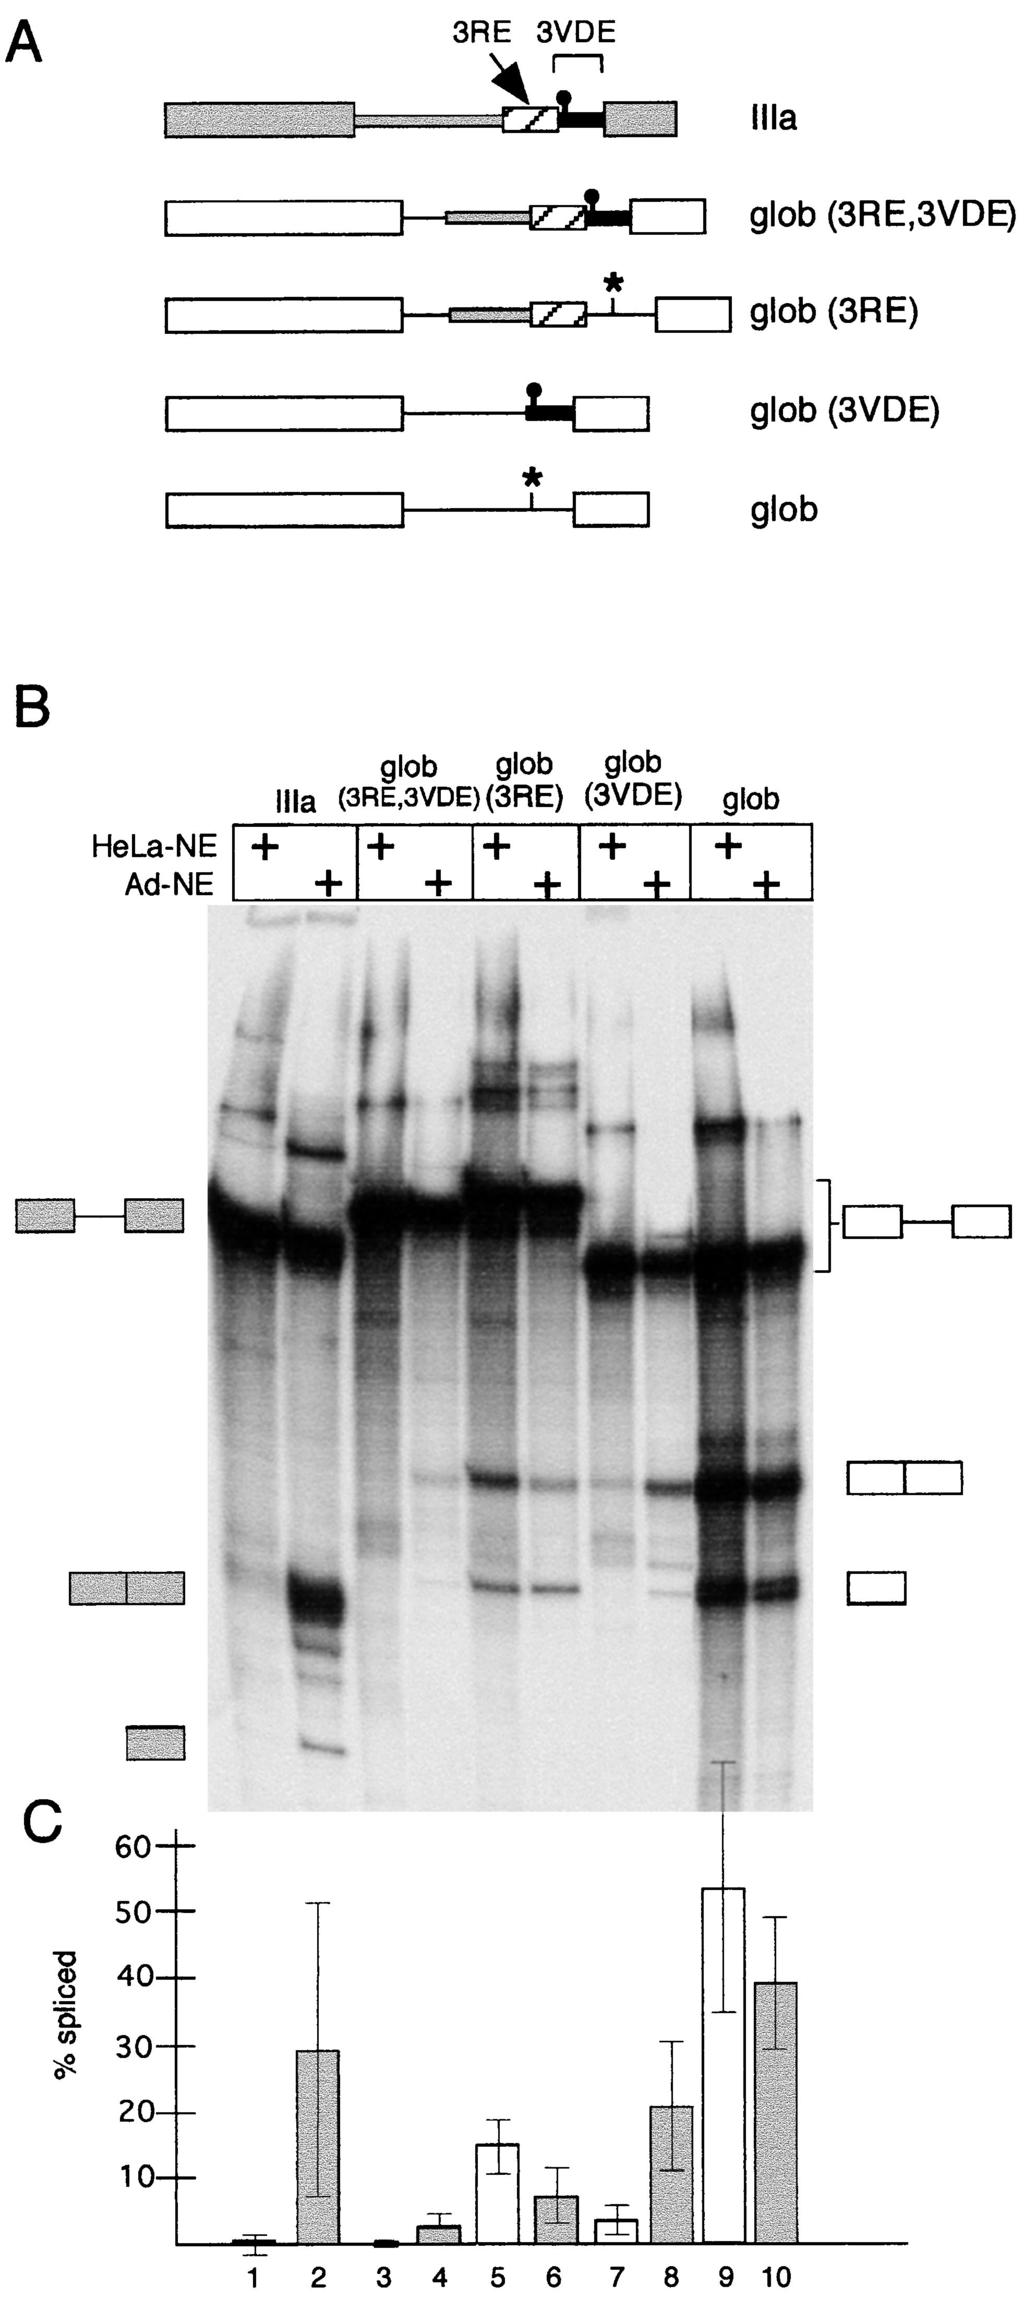 VOL. 20, 2000 SEQUENCE ELEMENTS REGULATING IIIa PRE-mRNA SPLICING 2319 FIG. 2. Mapping of the IIIa virus infection-dependent splicing enhancer, conferring an enhanced splicing phenotype in Ad-NE.